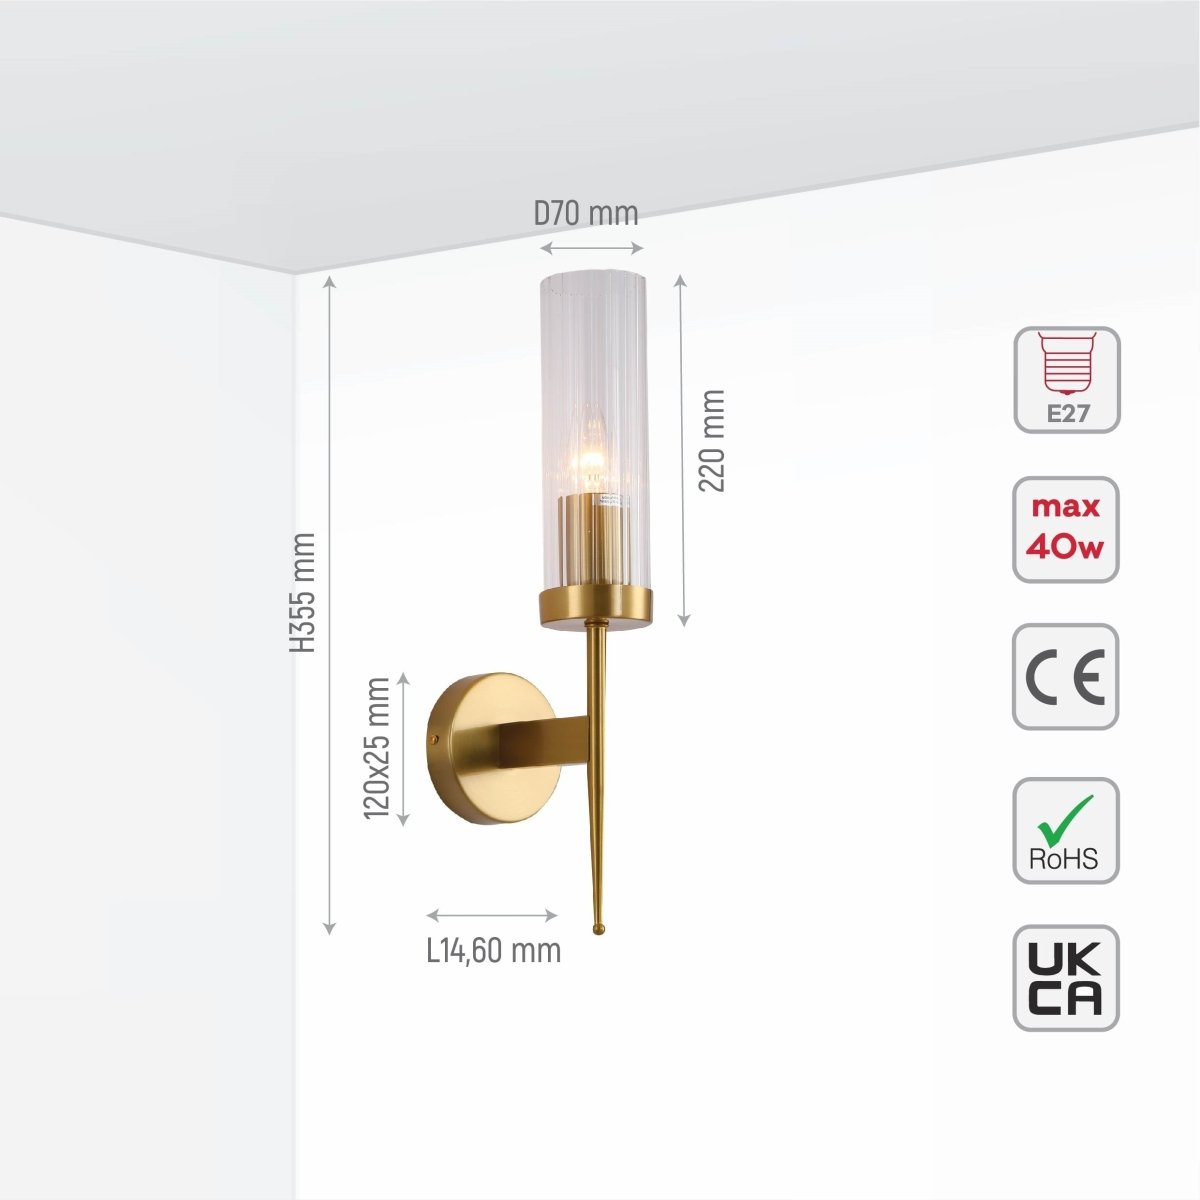 Product dimensions of Gold Aluminium Bronze Cylinder Clear Reeded Glass Joseph Fonteyn Fluted Wall Light E27